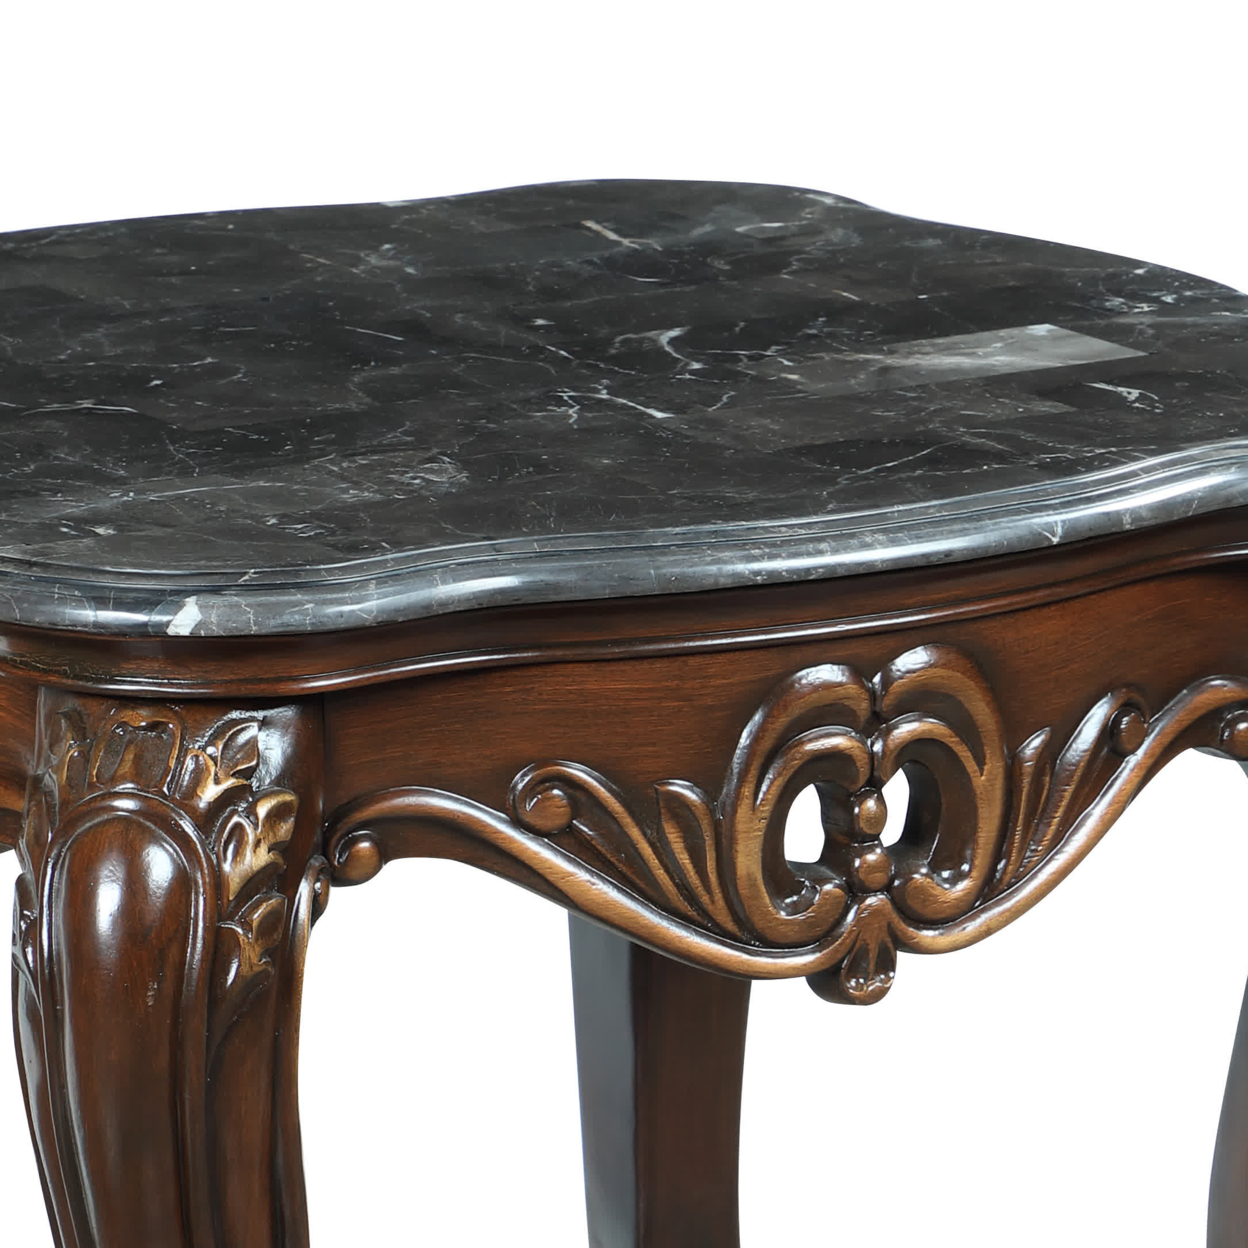 Wooden End Table With Marble Top And Floral Engravings, Brown And Black- Saltoro Sherpi